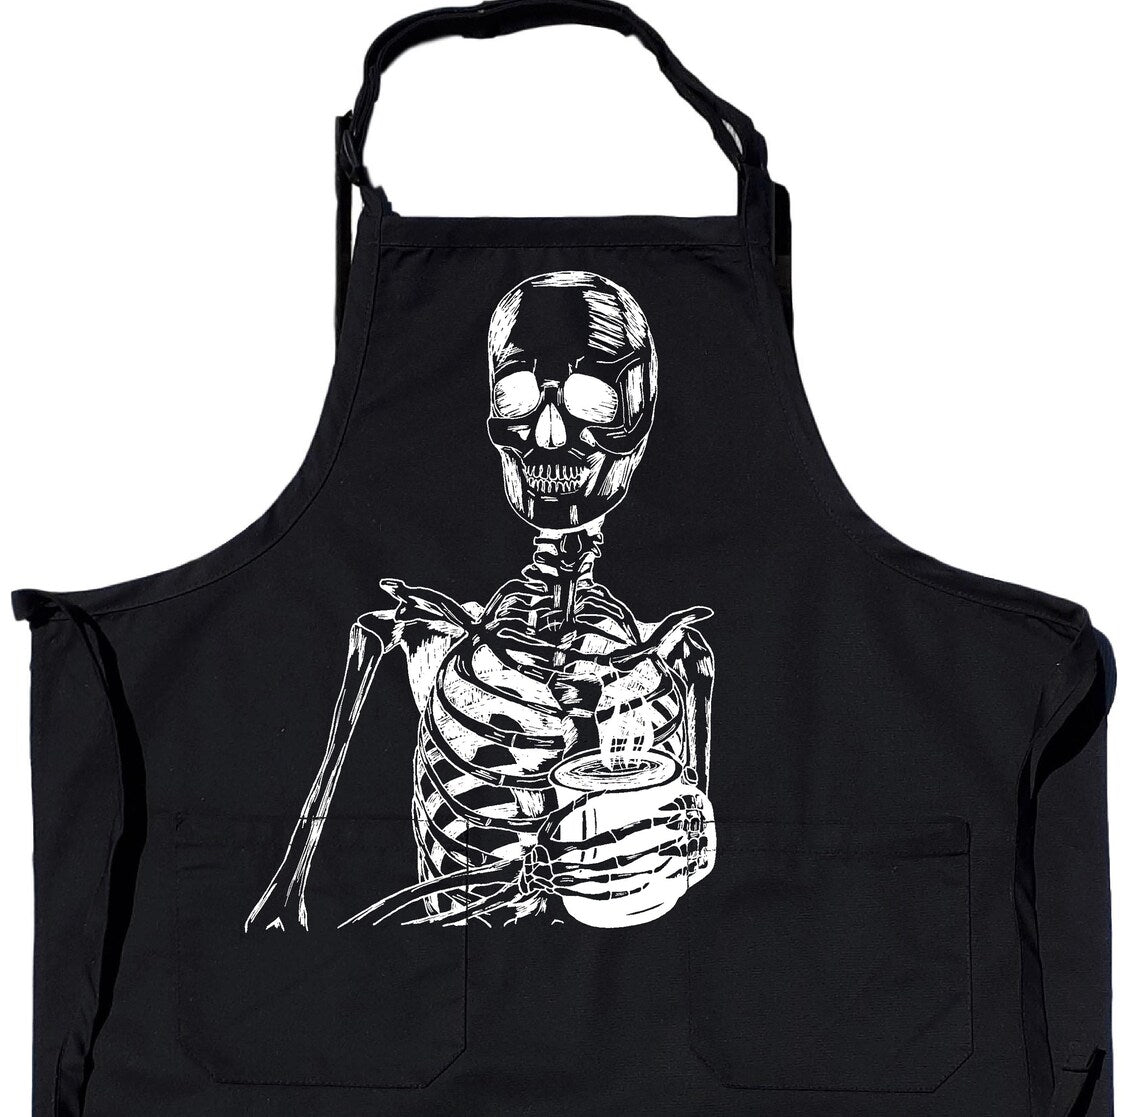 Skeleton Drinking Coffee Chef's Apron with Pockets